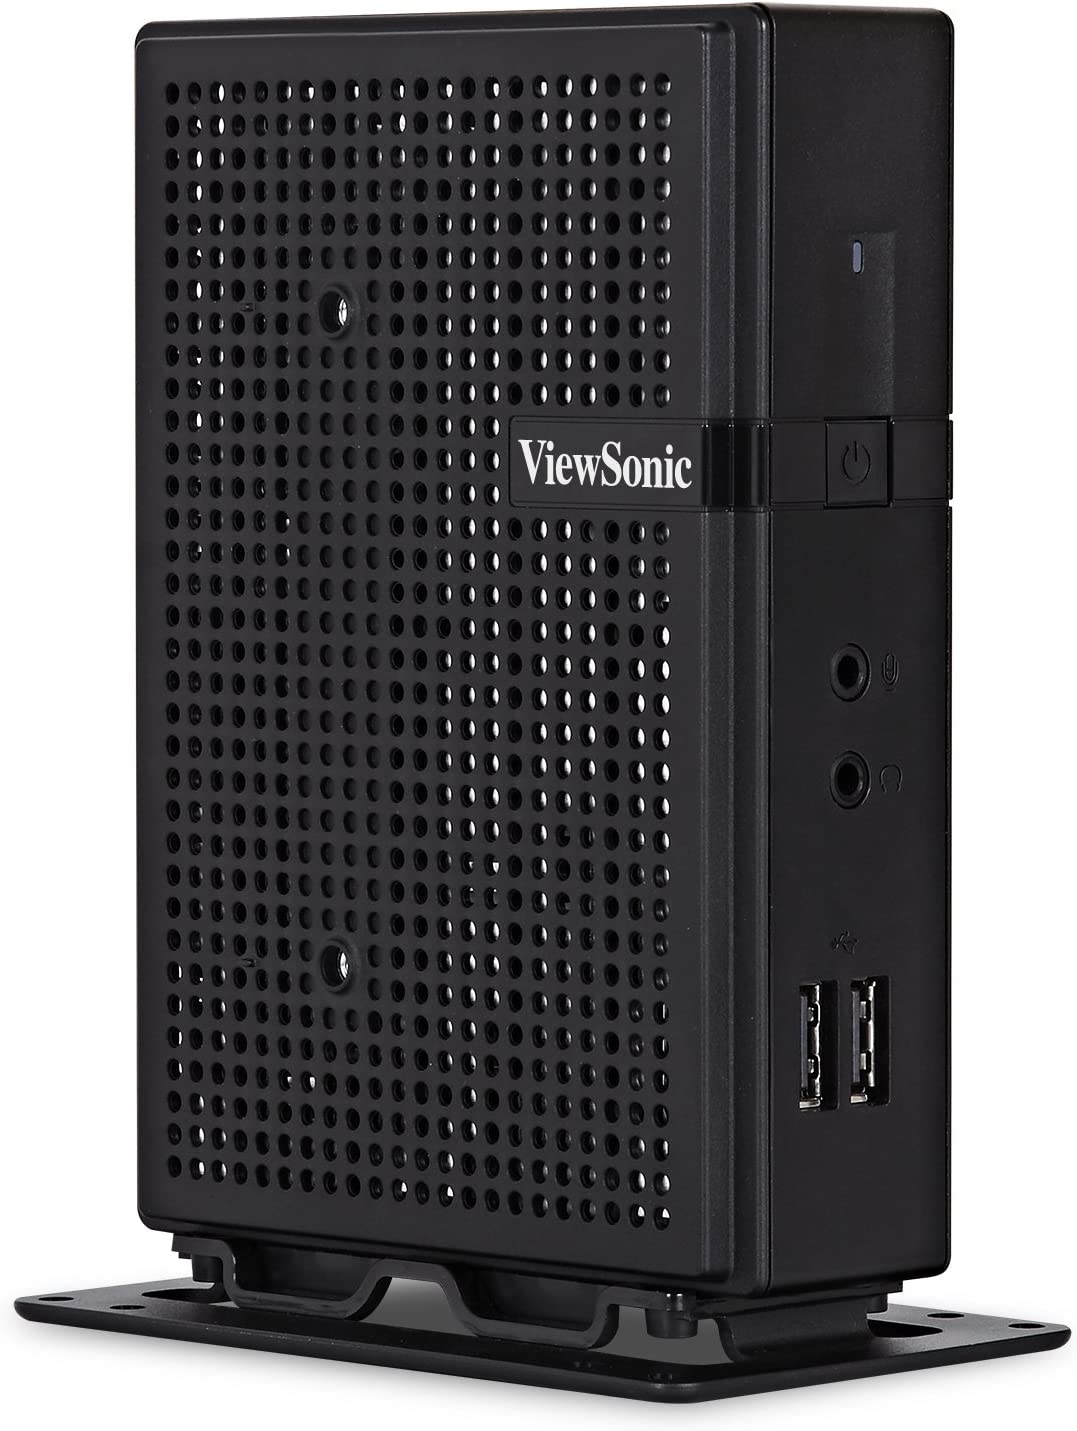 ViewSonic SC-T45_BK_US_0-S Thin Client for Virtualized Computing Cloud-Commercial Server - Certified Refurbished